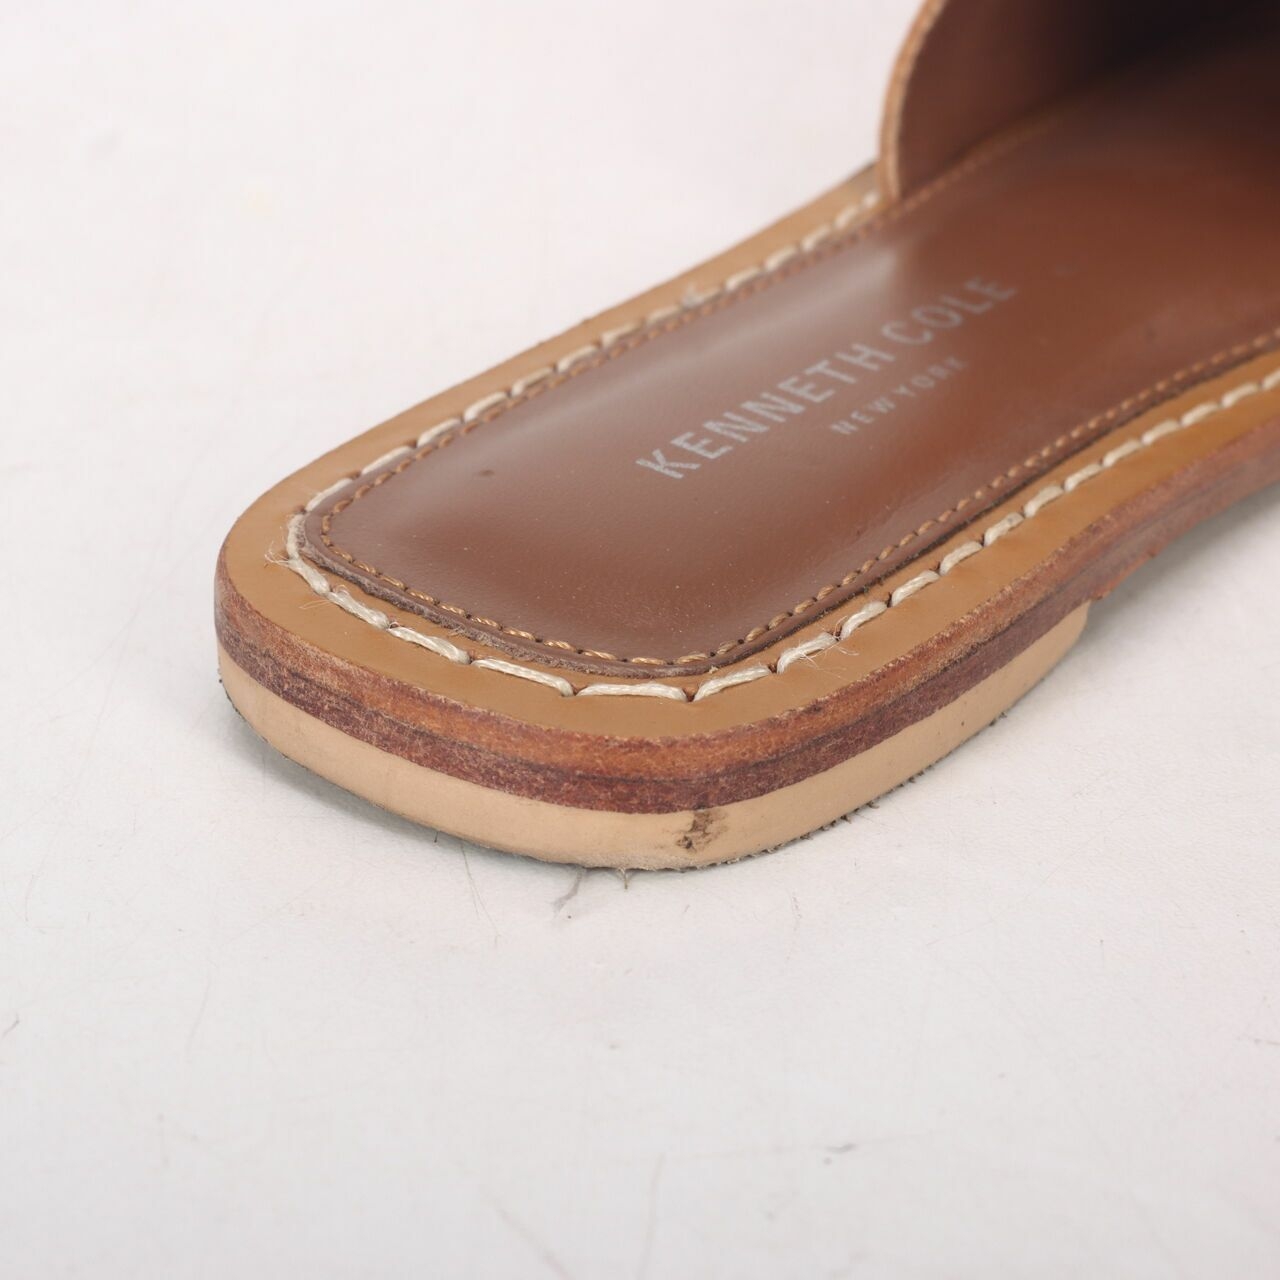 Kenneth Cole Brown Sandals